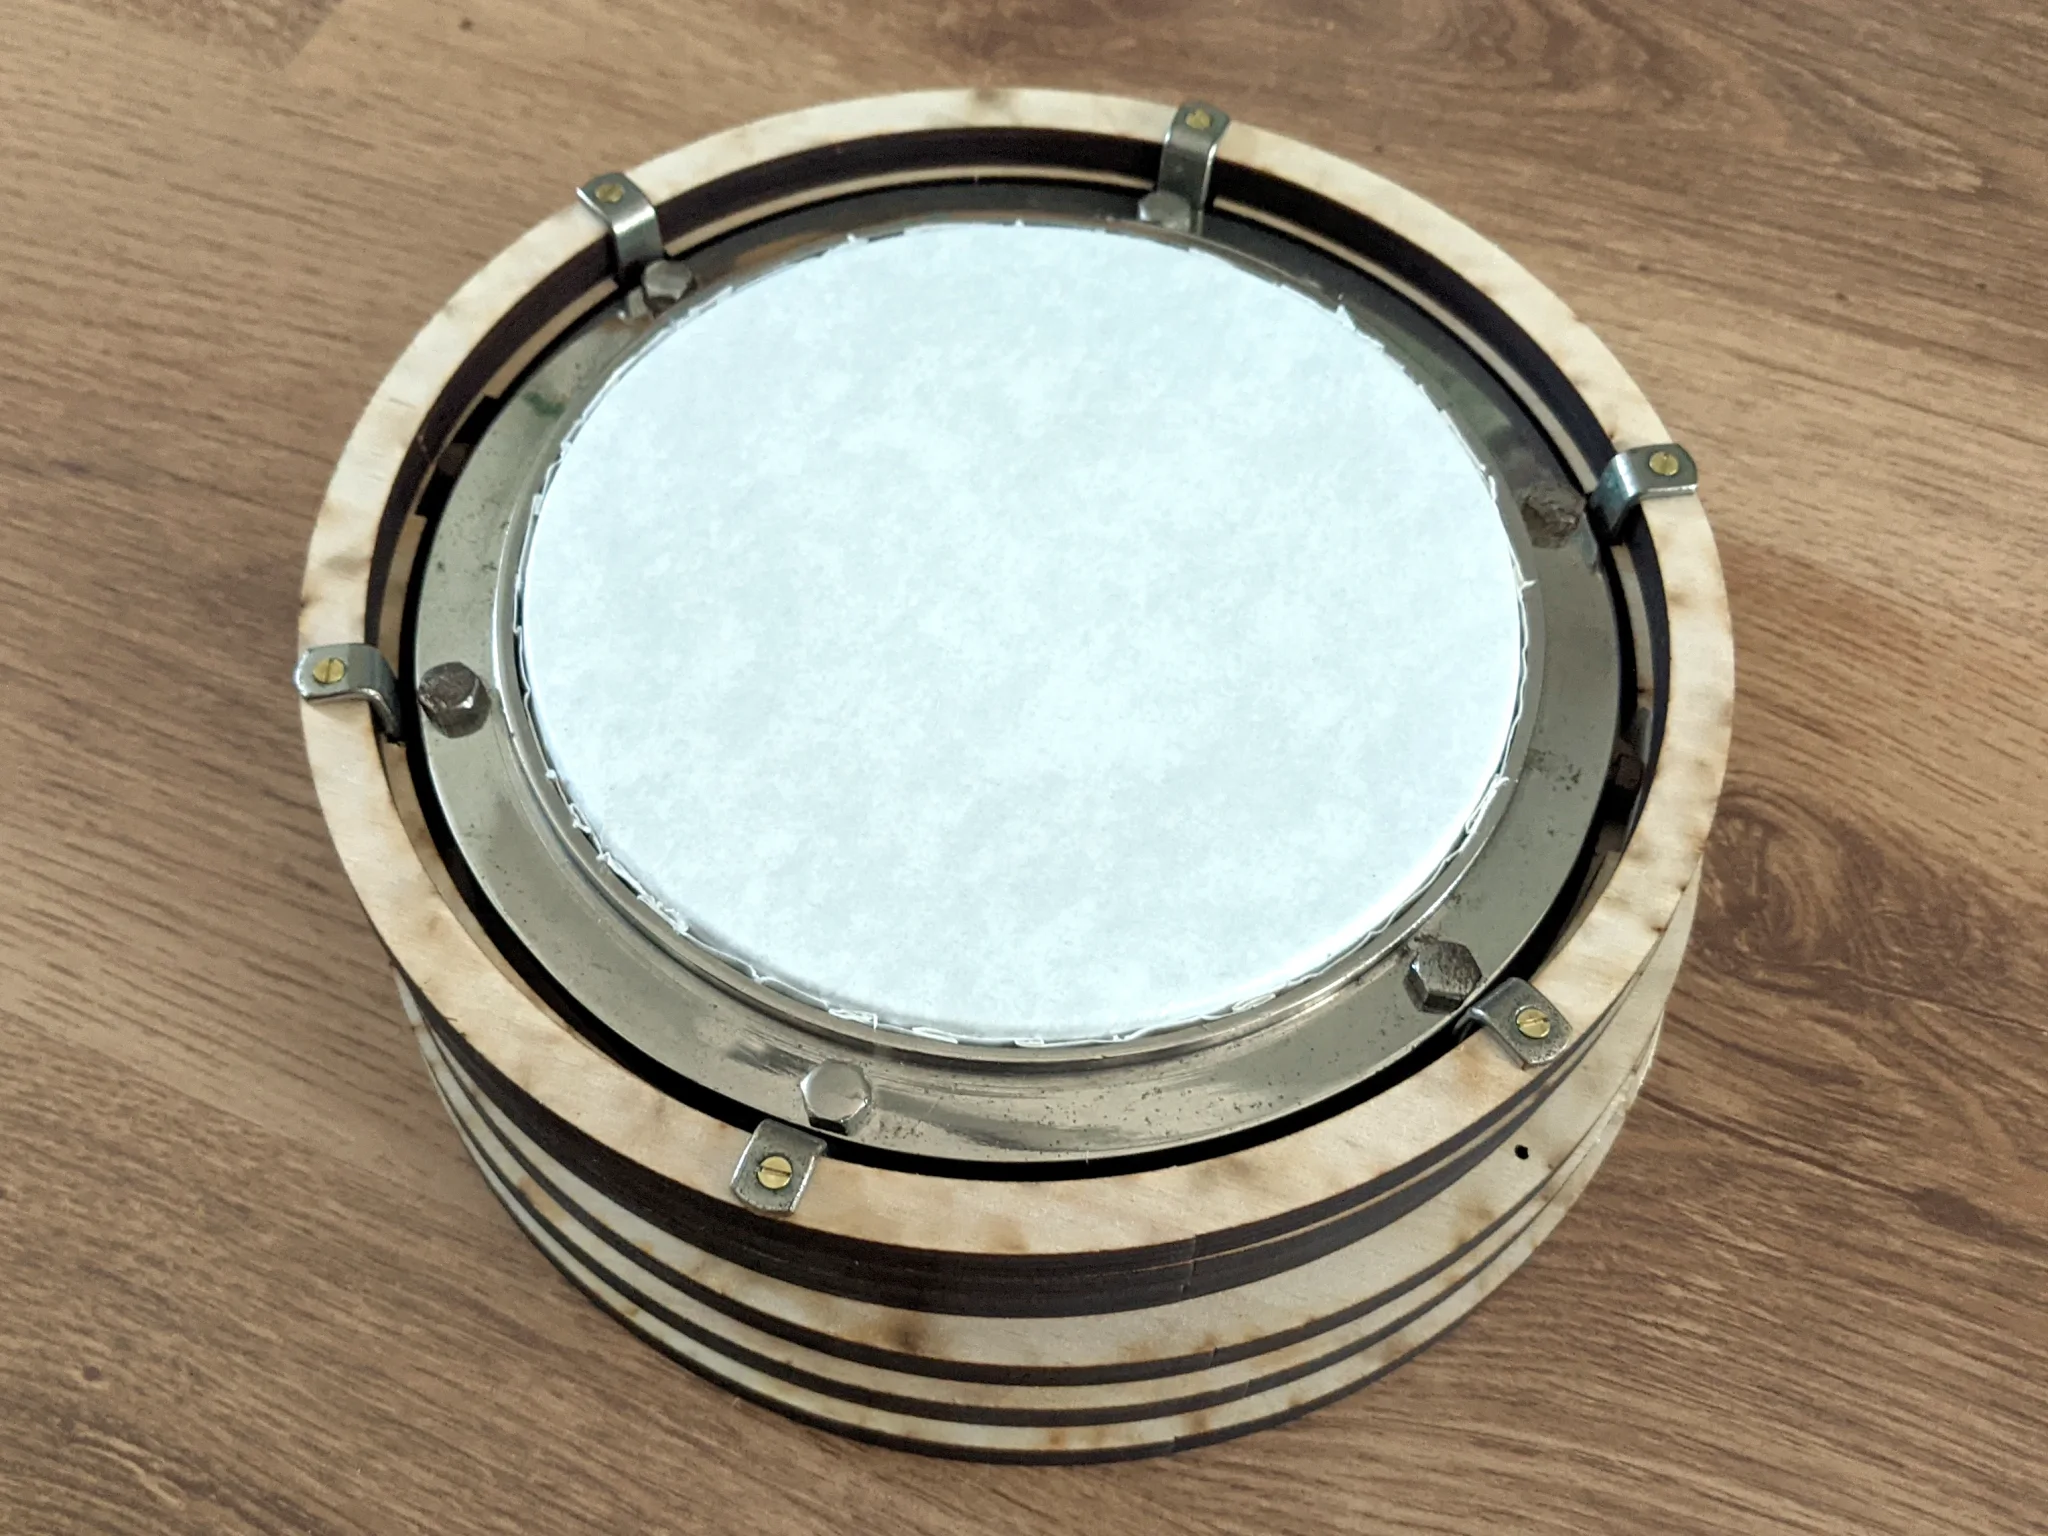 A stack of laser-cut rings with the tension ring screwed to the top and a
taut drumskin